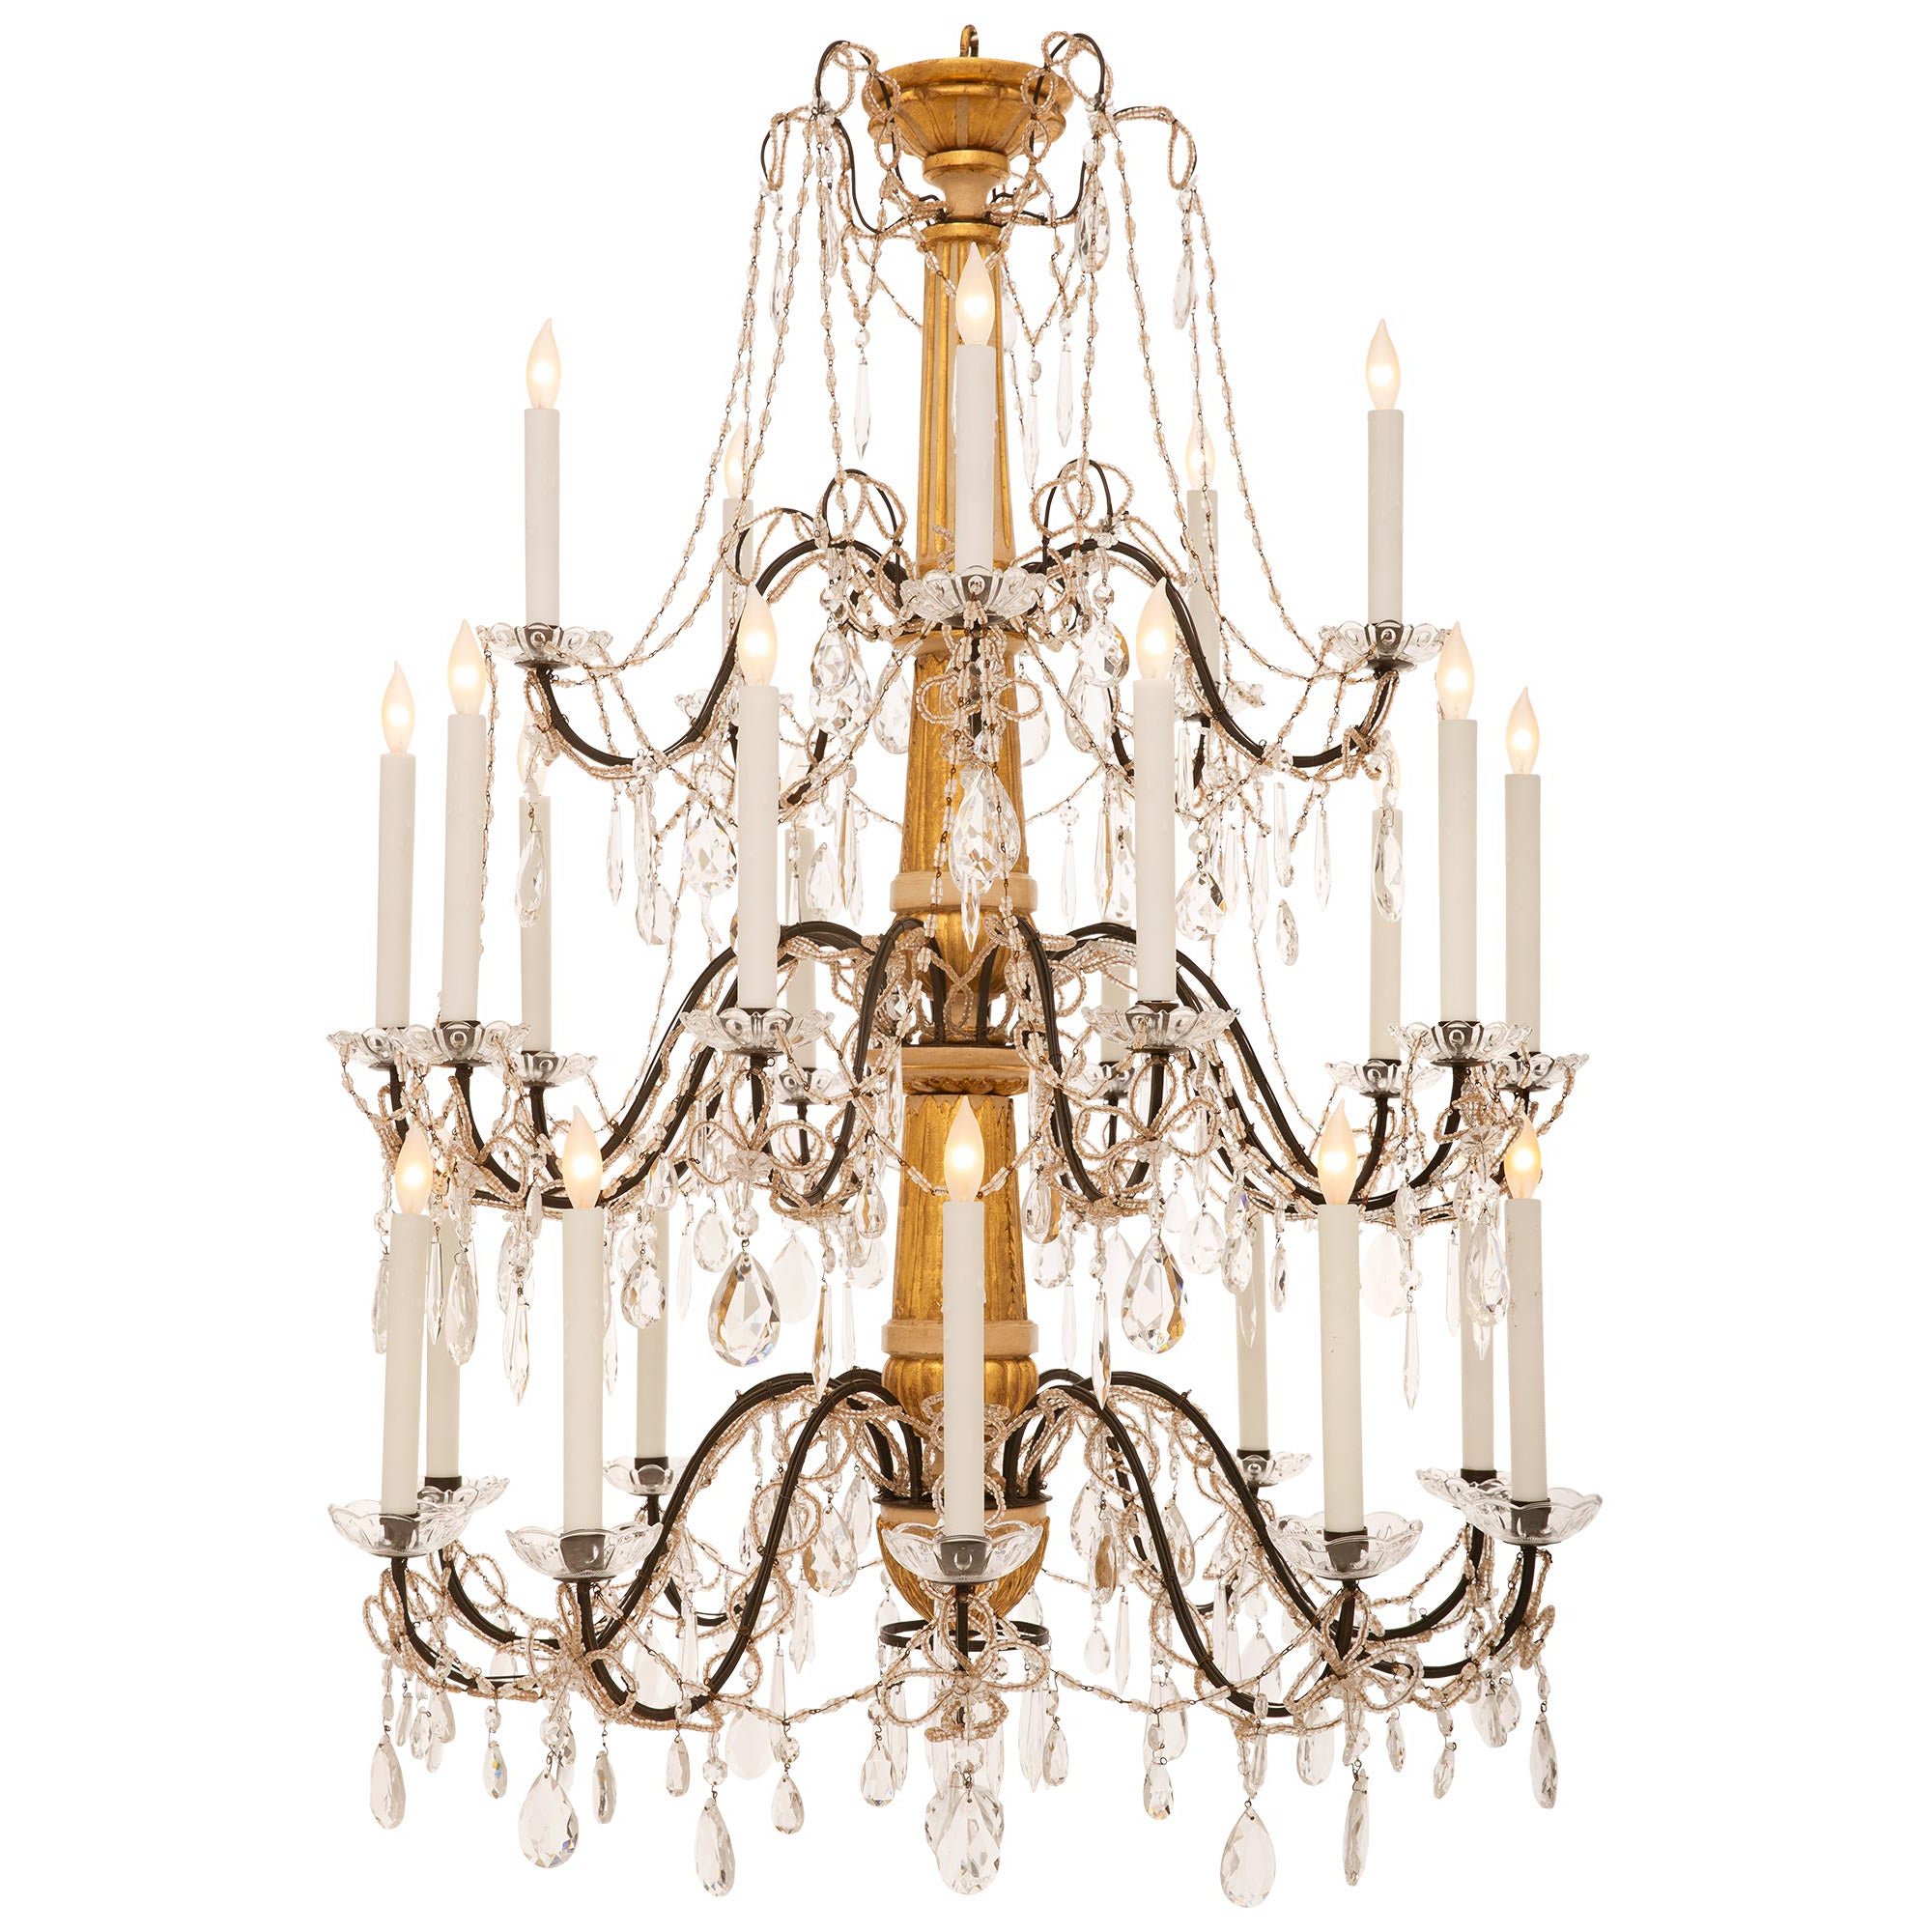 Italian 19th Century Giltwood, Patinated Wood, Iron And Crystal Chandelier For Sale